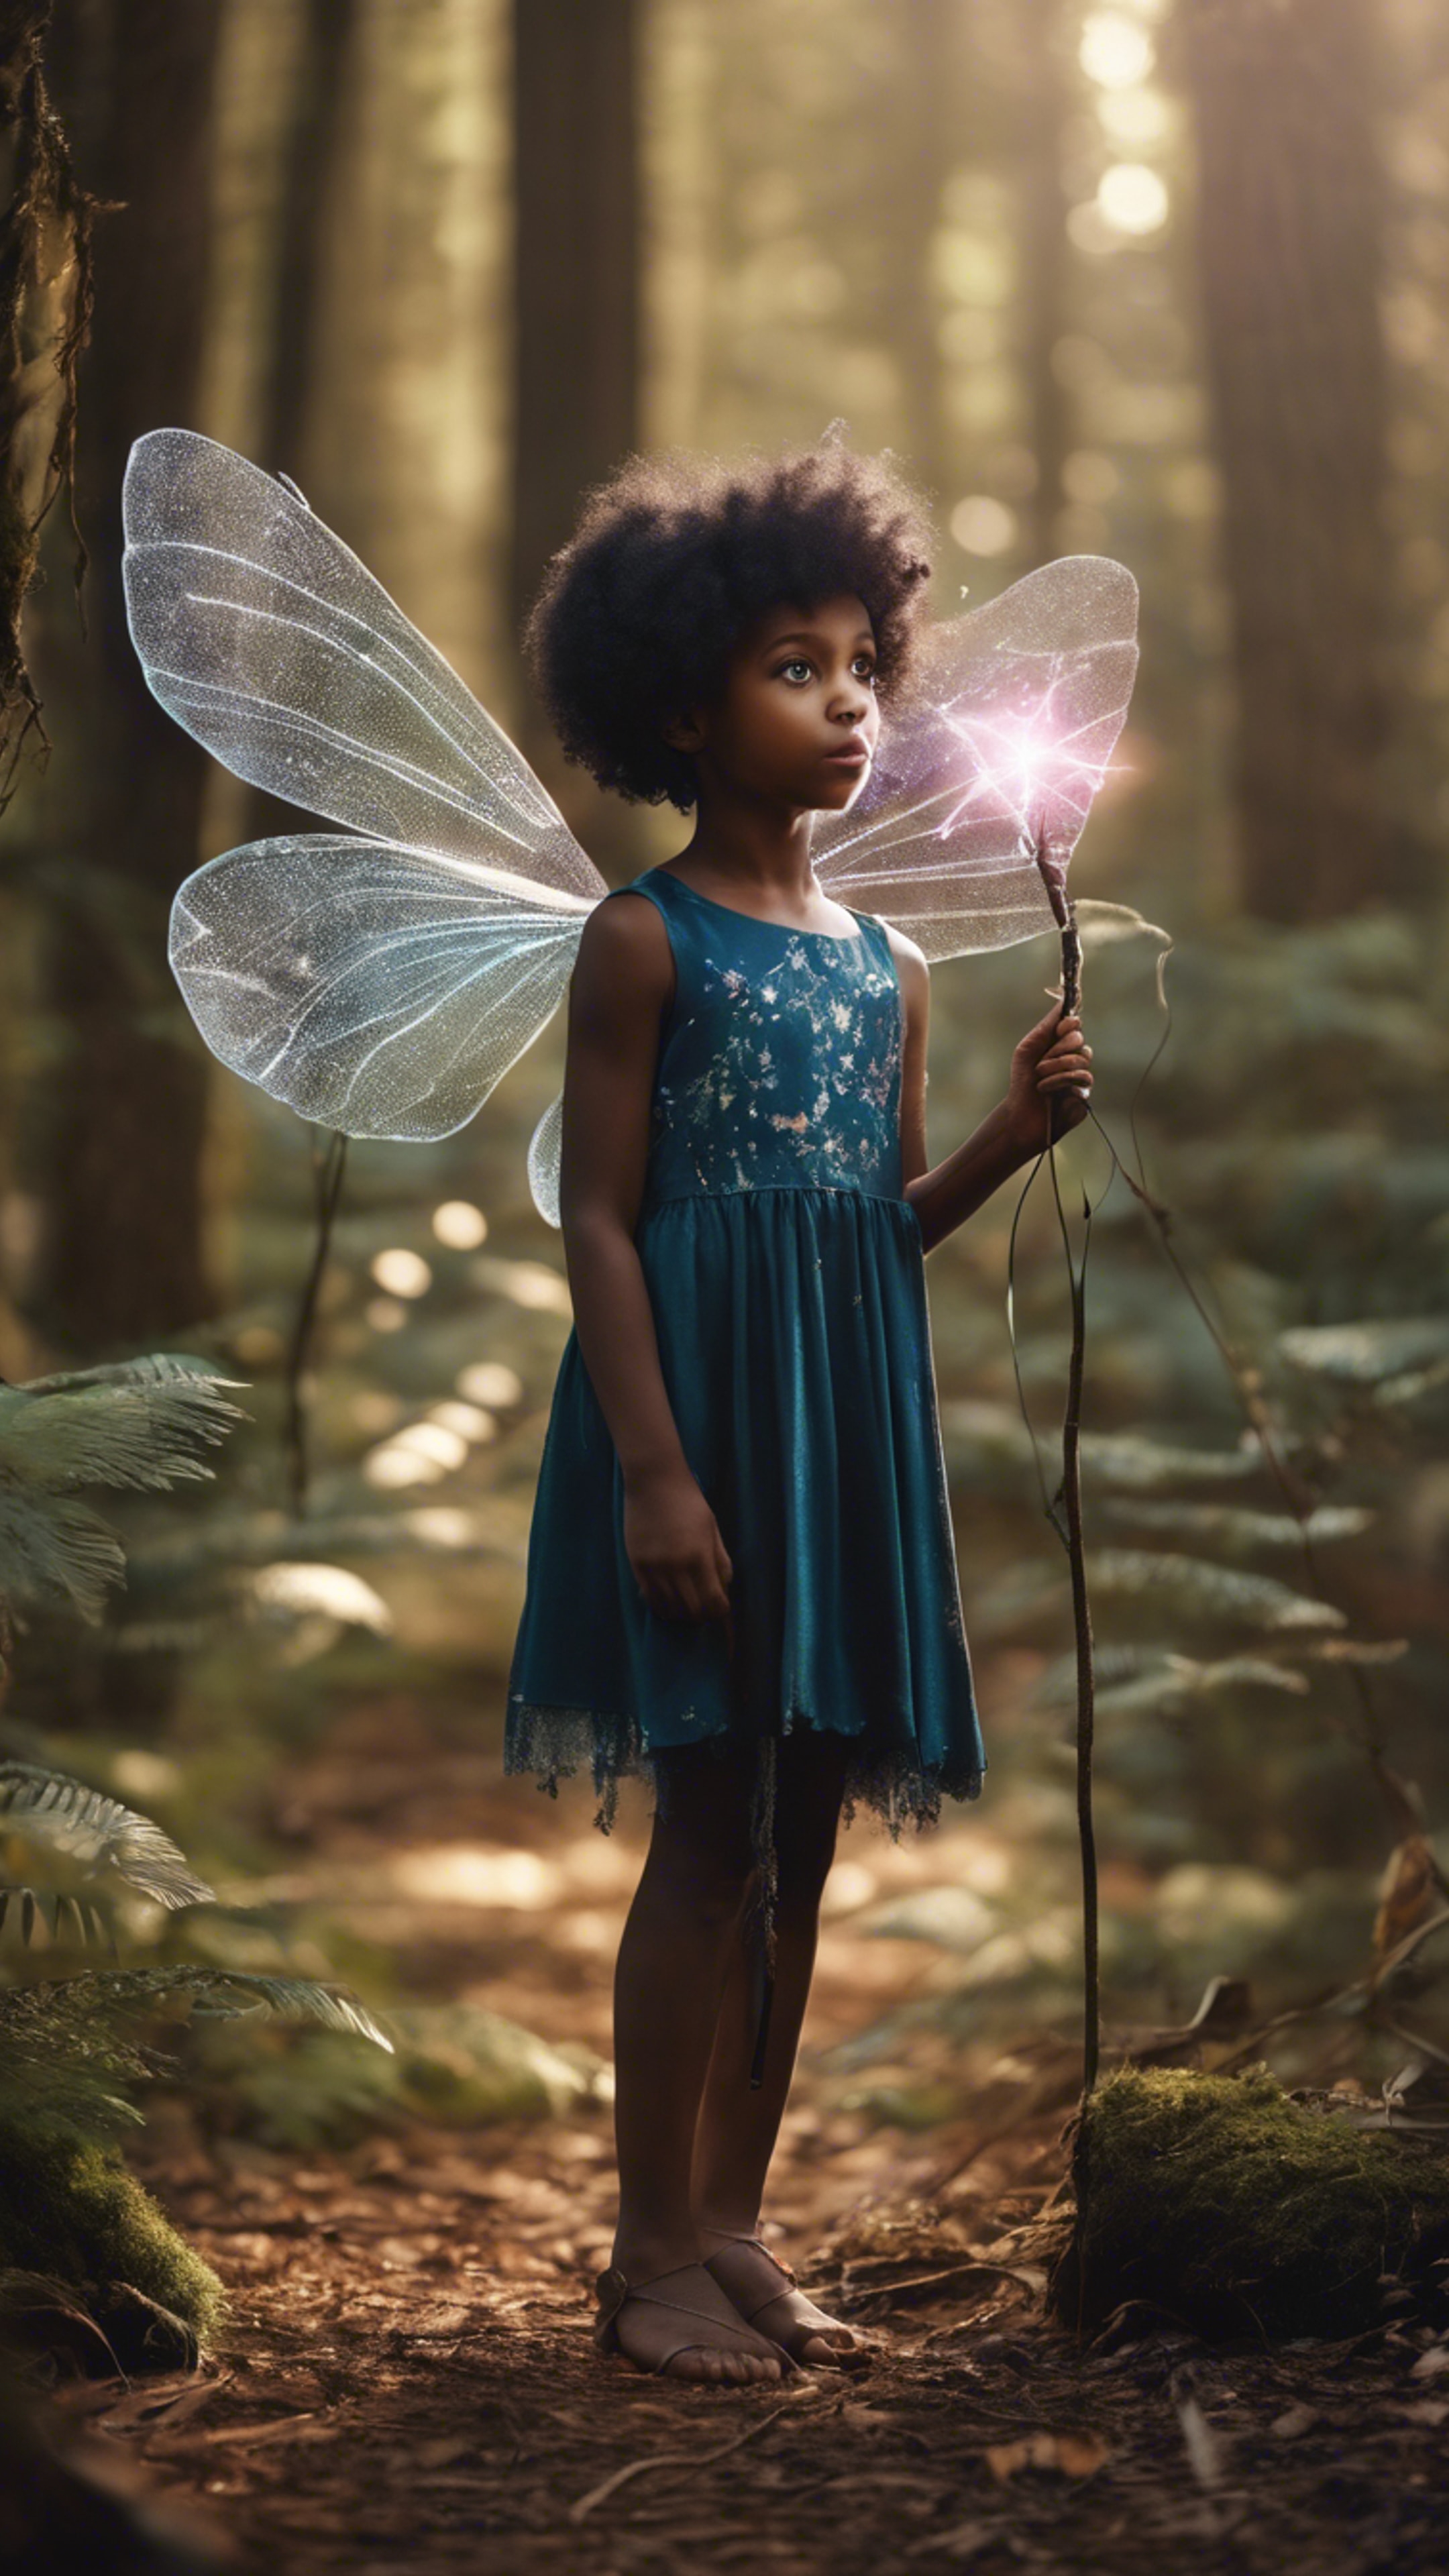 A cute image of a black girl wearing fairy wings, holding a magic wand in a mystical forest. Sfondo[6c77347a4892474c928d]